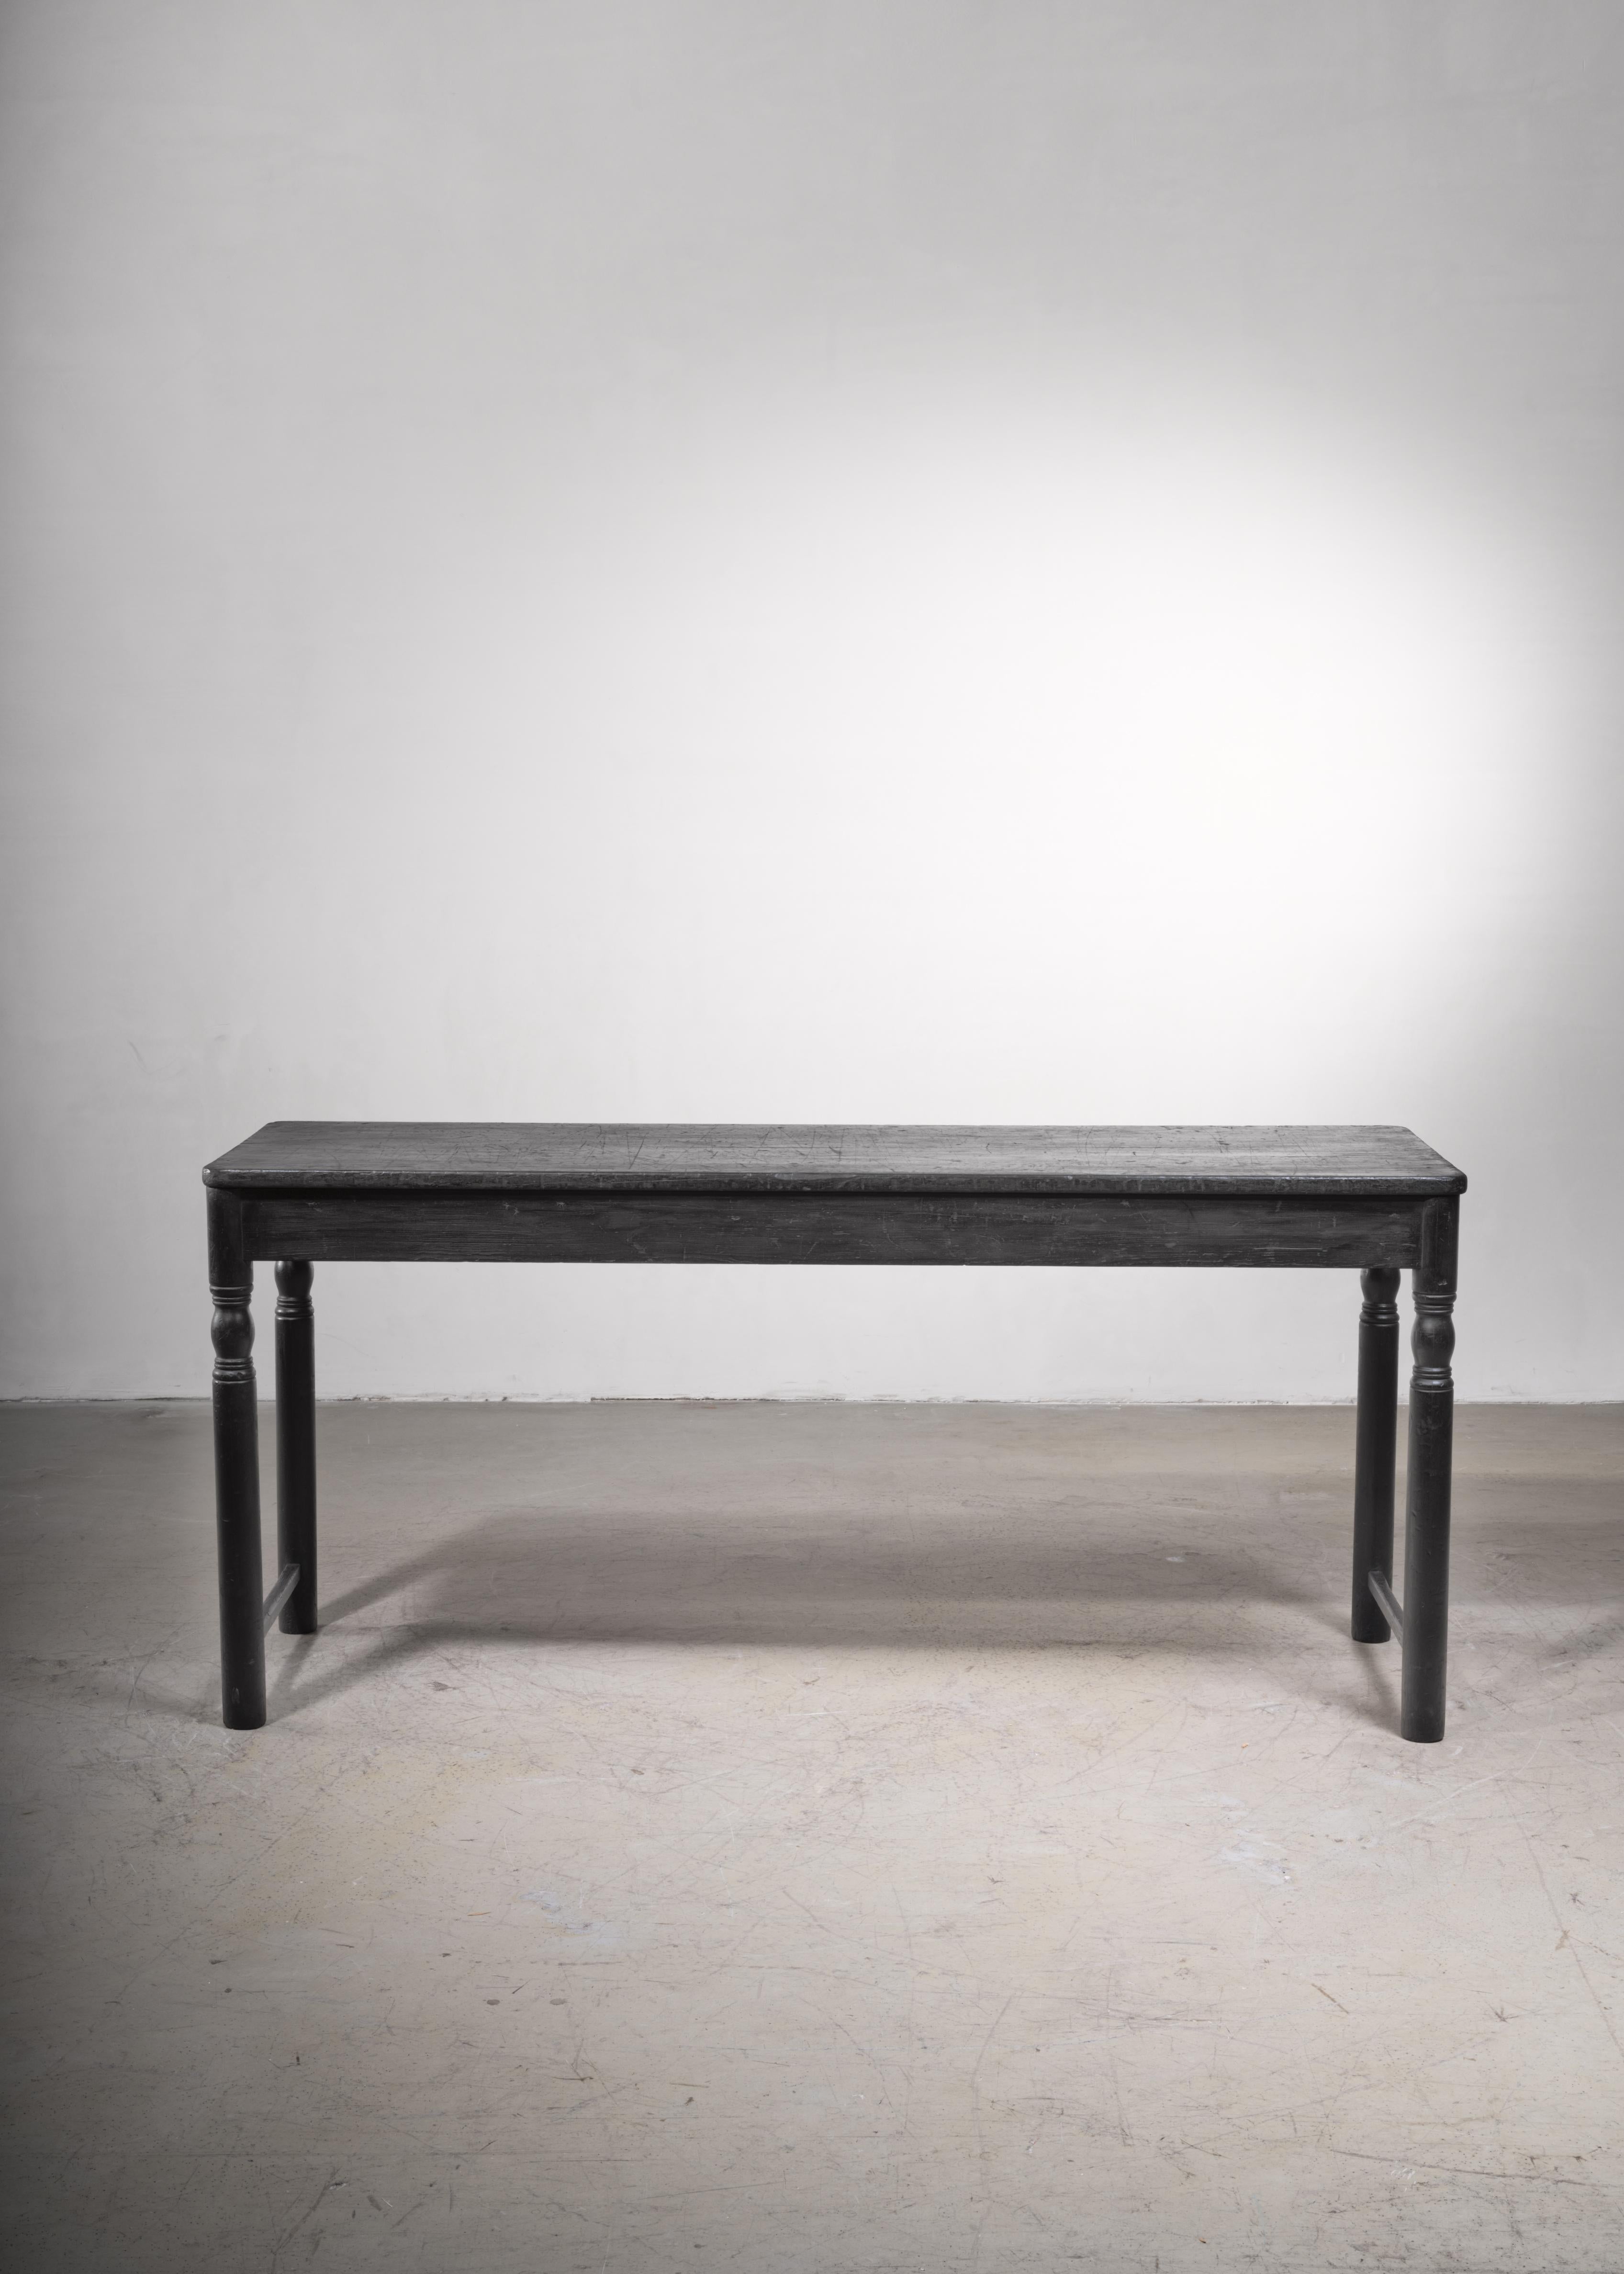 A late 19th century rectangular pine console or working table from Sweden. The table has turned legs and is restored back to its original black paint.